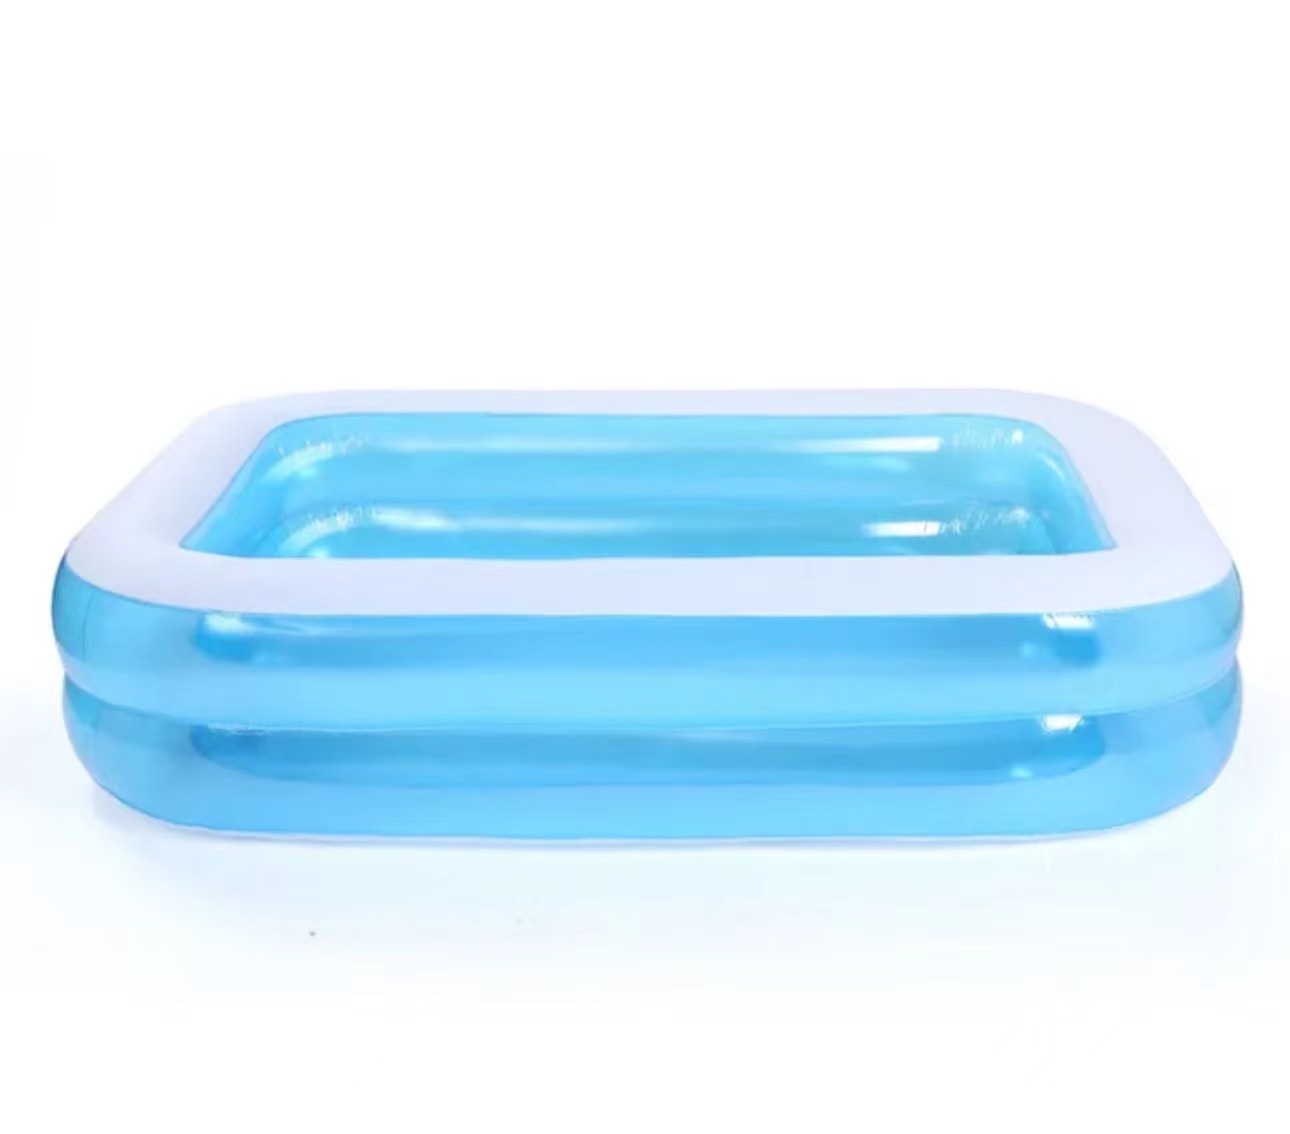 Hot selling Inflatable Swimming Pool for Adults Family Large Size Rectangular Deep Blow up Pool